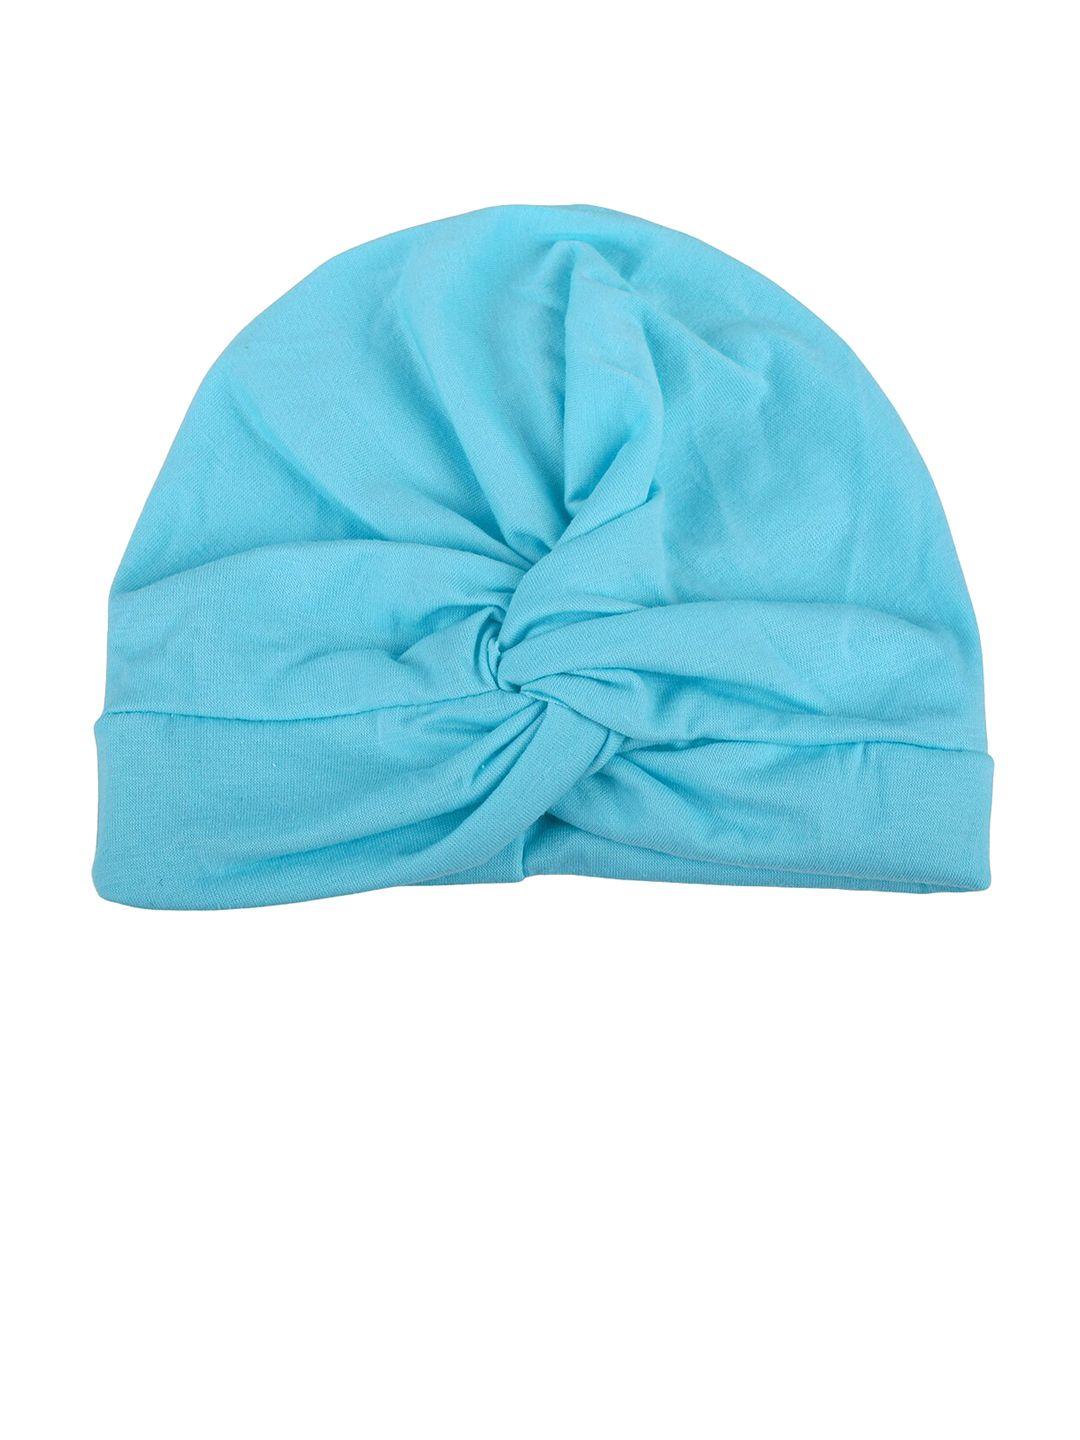 baby moo girls turquoise blue solid cotton beanie cap